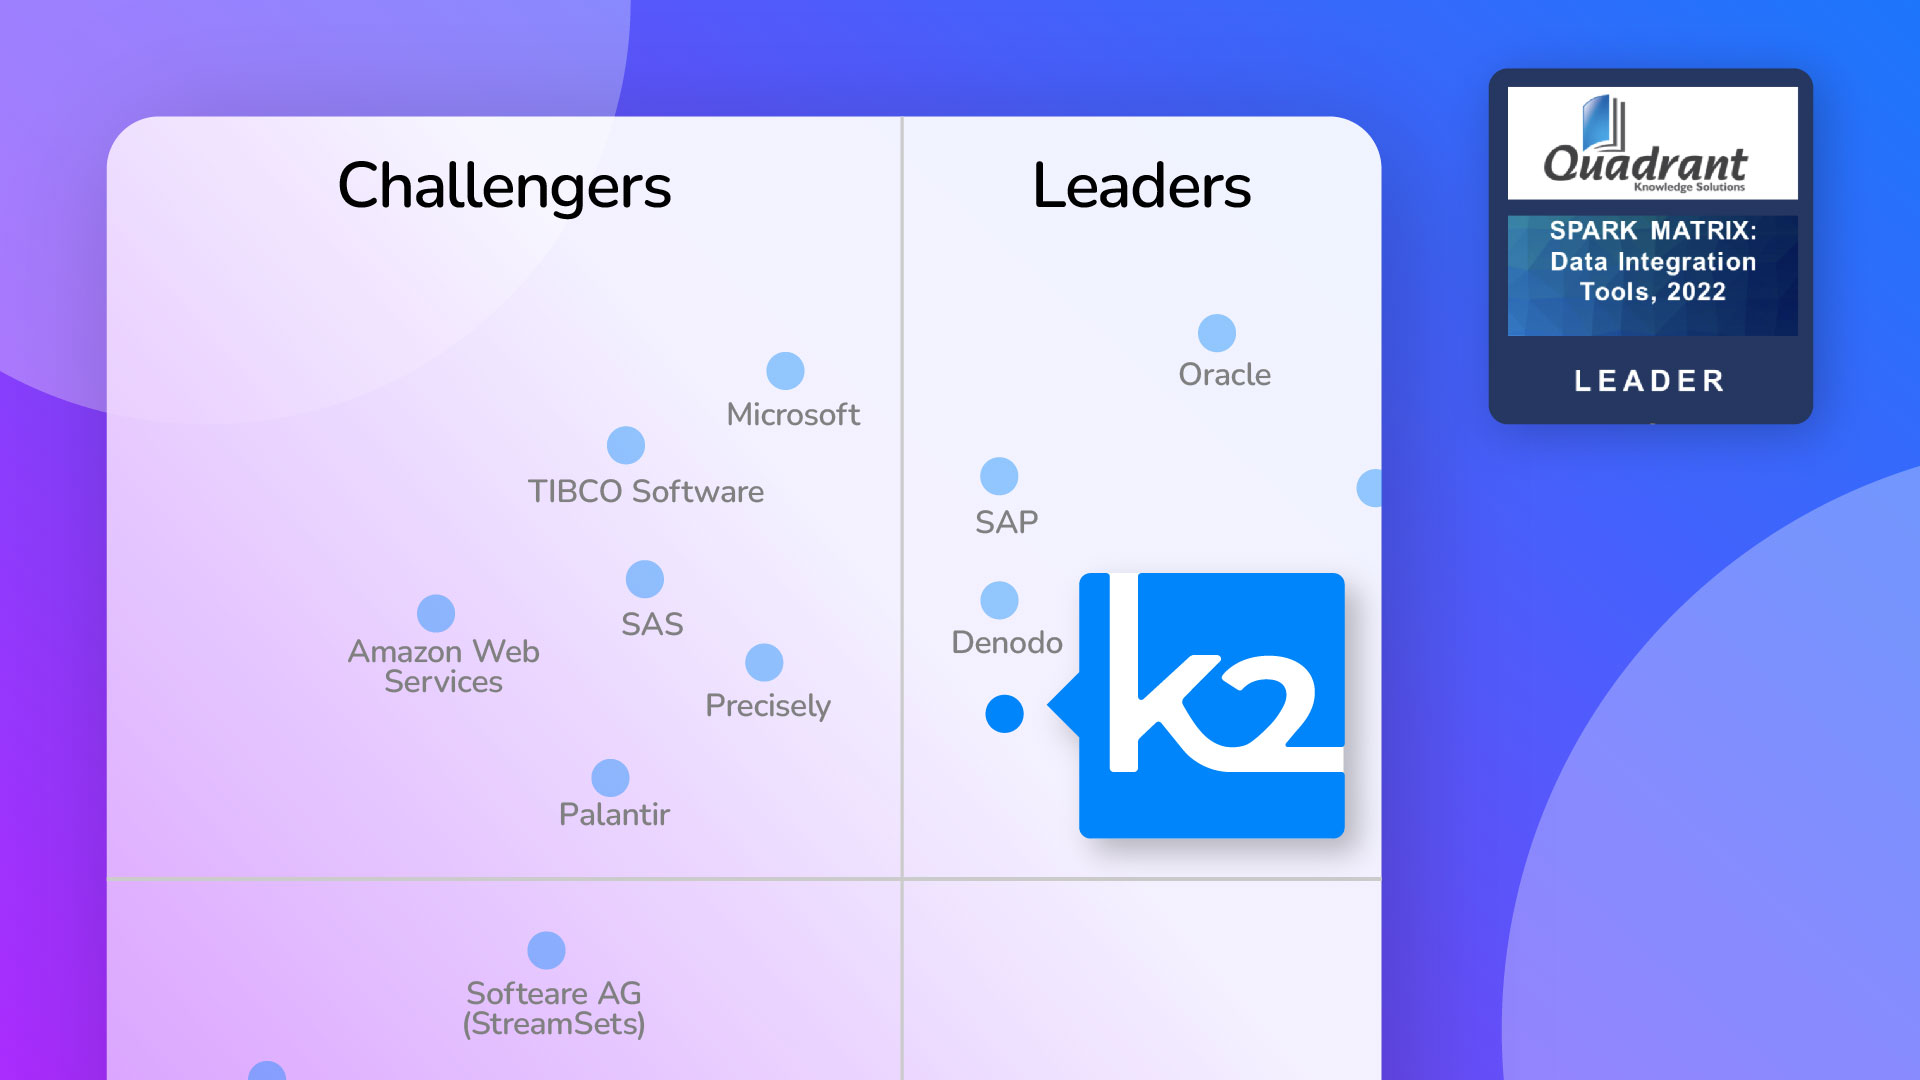 K2view positioned as the Leader in the 2022 SPARK Matrix for Data Integration Tools by Quadrant Knowledge Solutions